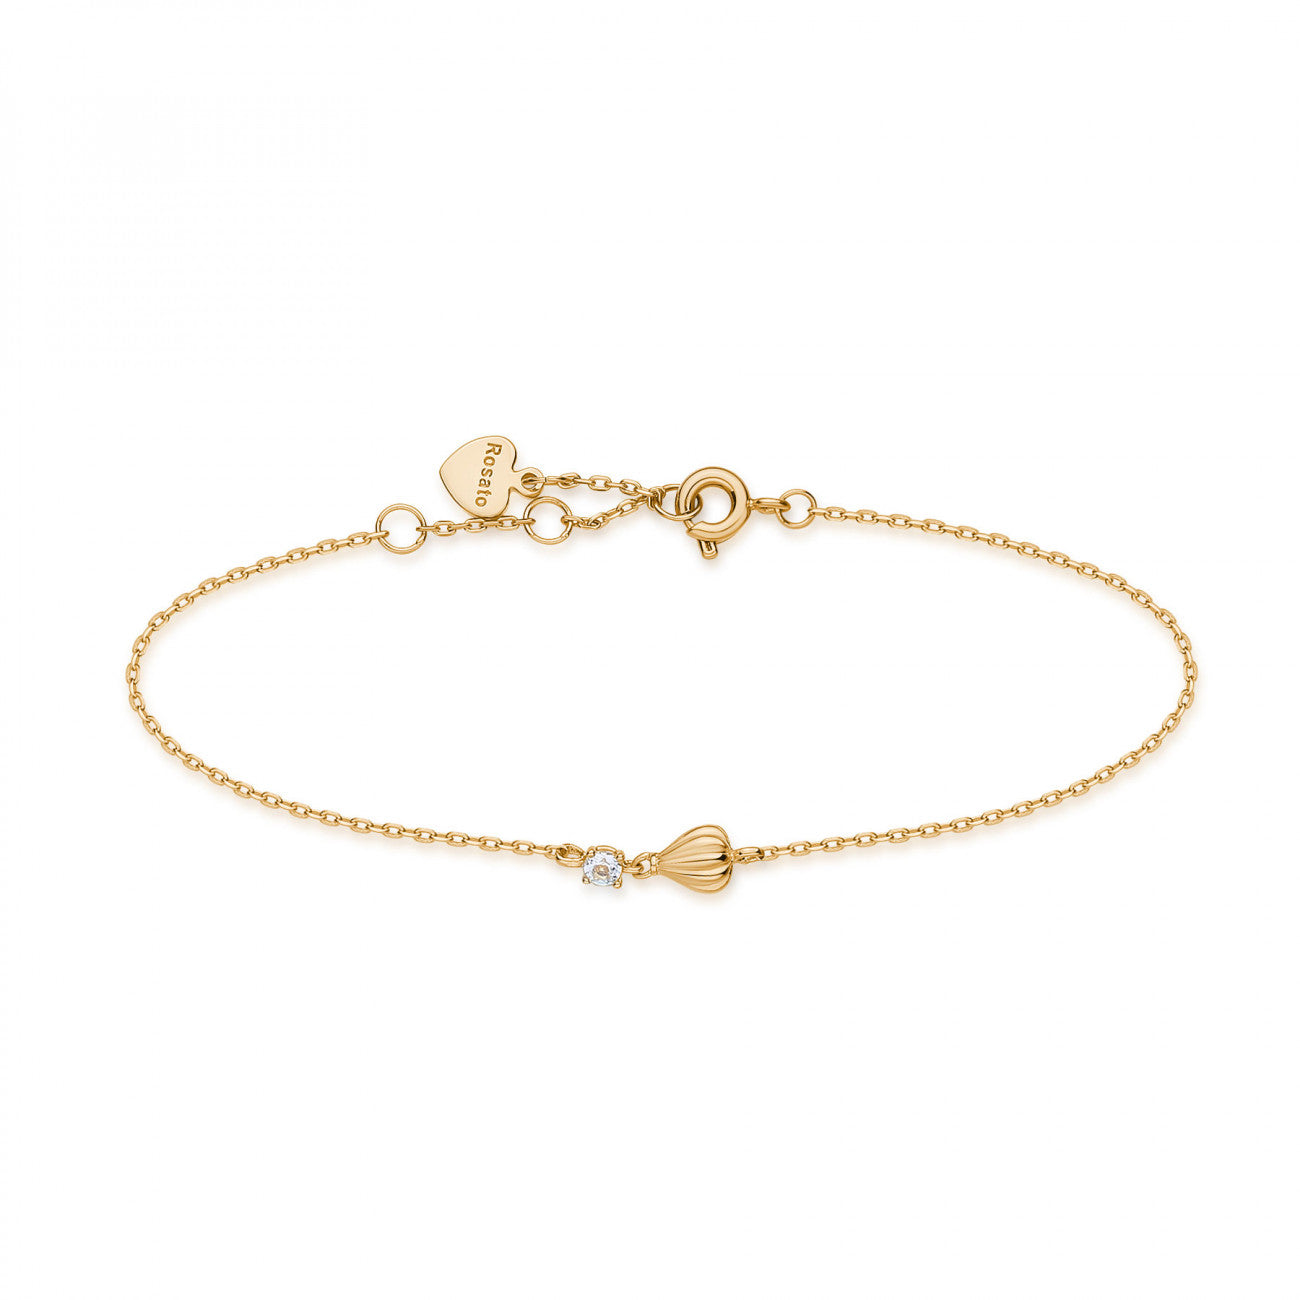 Hot Air Balloon Bracelet in Rose Gold and Diamonds